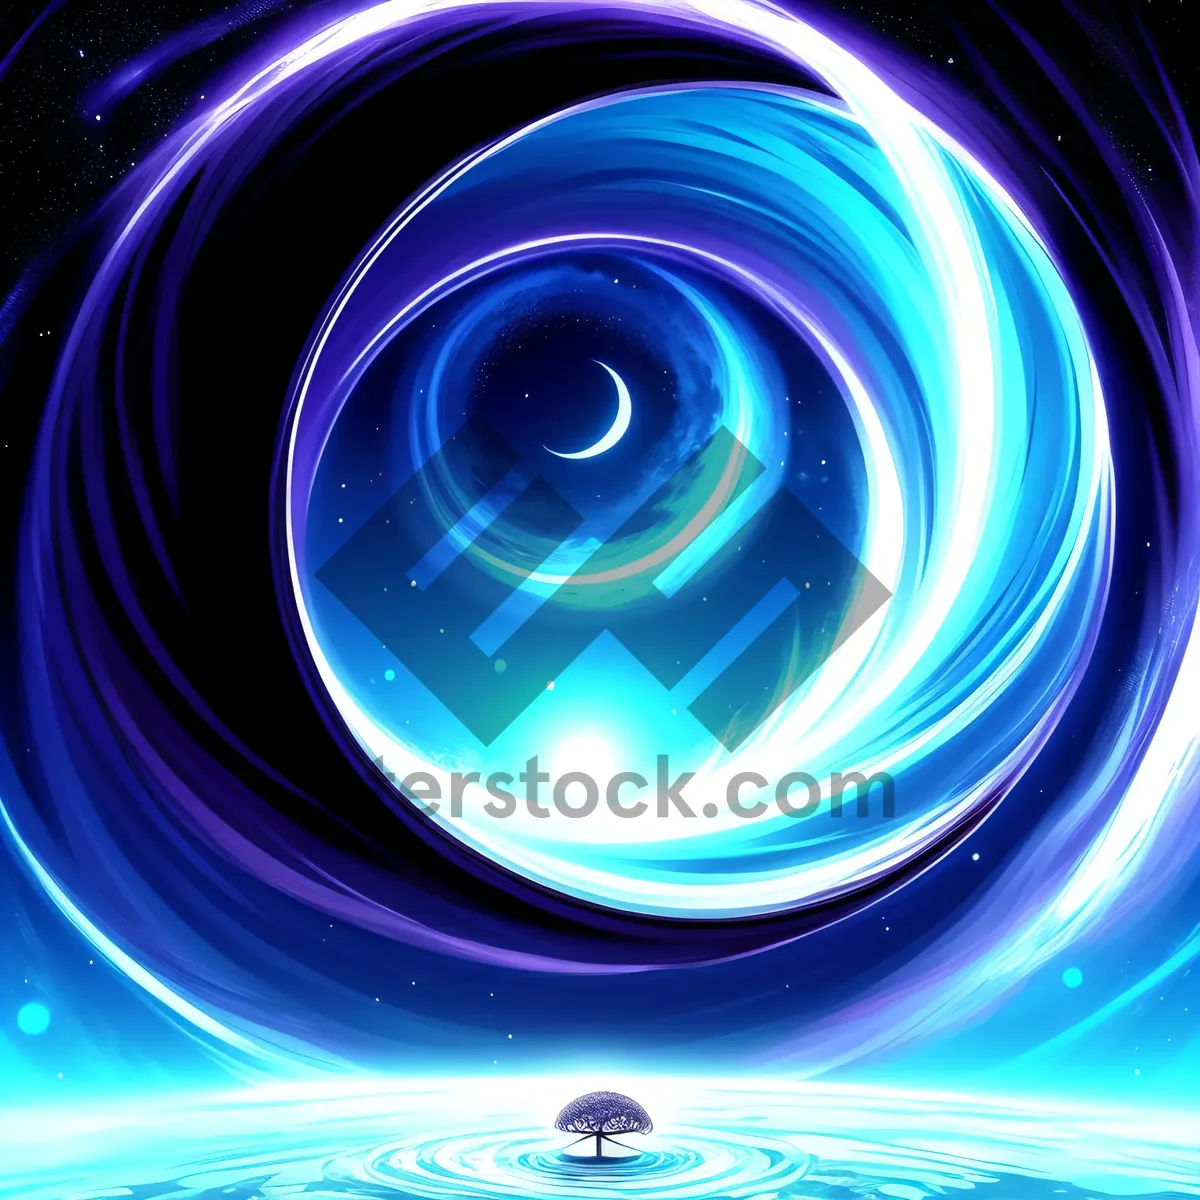 Picture of Vibrant Fractal Light: Abstract Digital Wallpaper with Dynamic Swirls and Colors